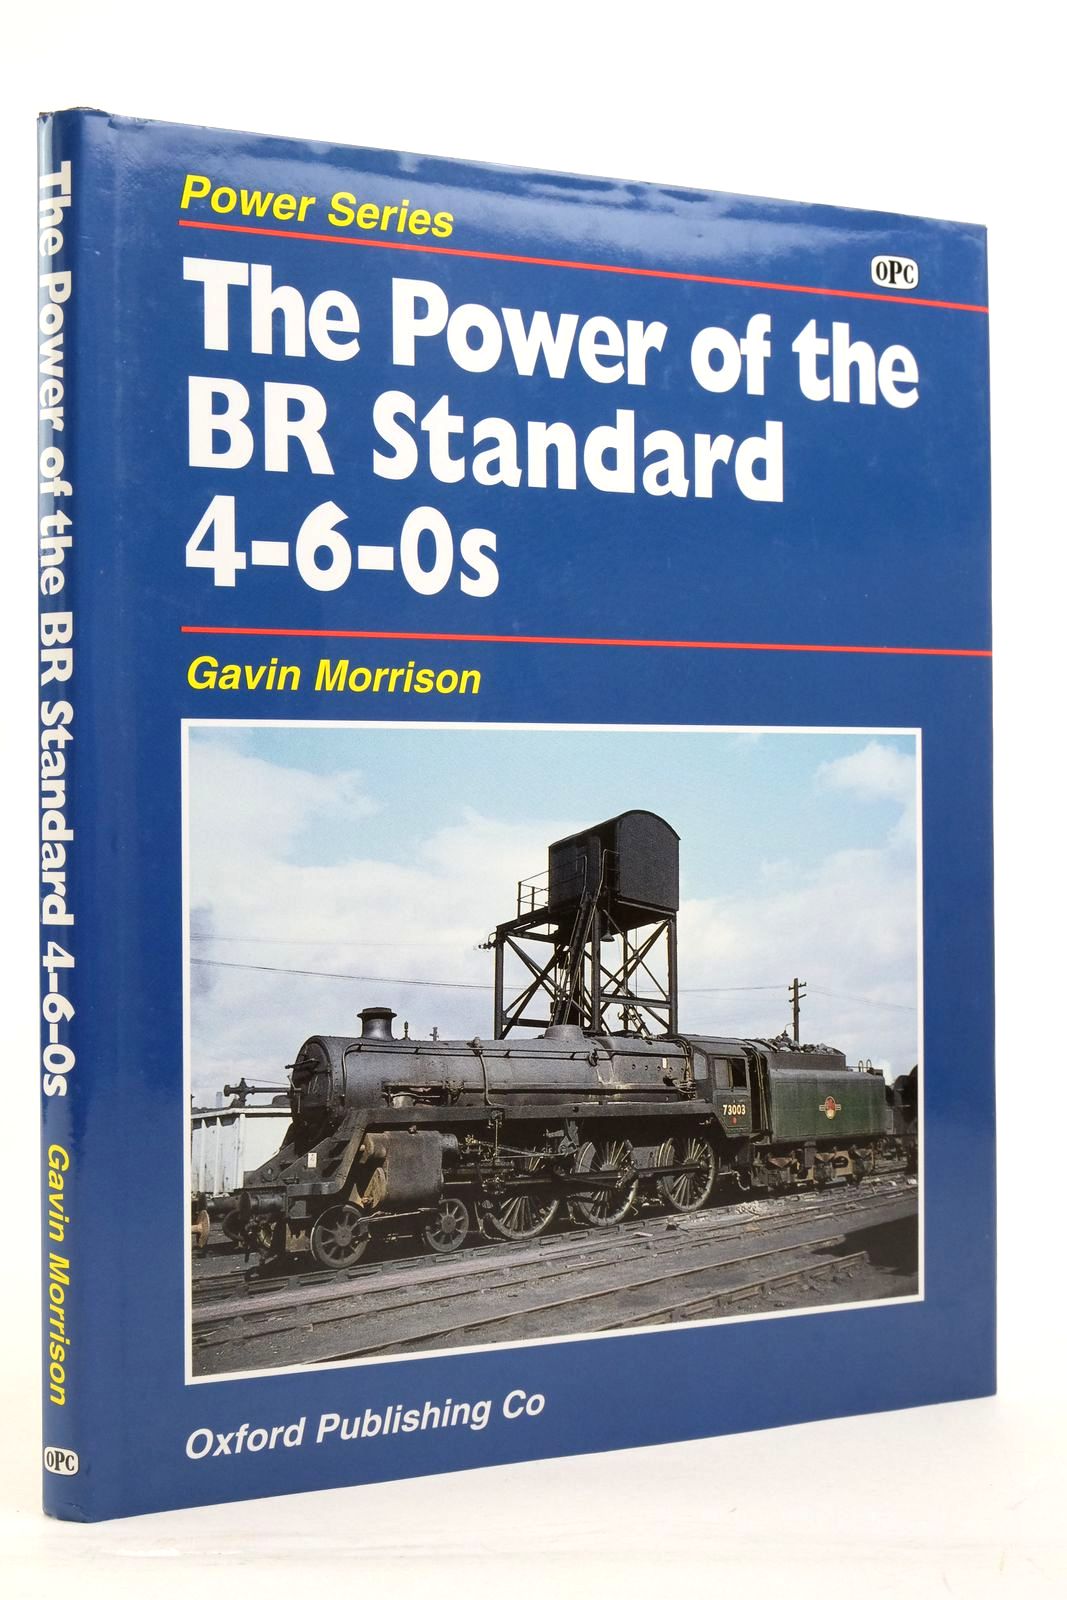 Photo of THE POWER OF THE BR STANDARD 4-6-0S written by Morrison, Gavin published by Oxford Publishing (STOCK CODE: 2137814)  for sale by Stella & Rose's Books